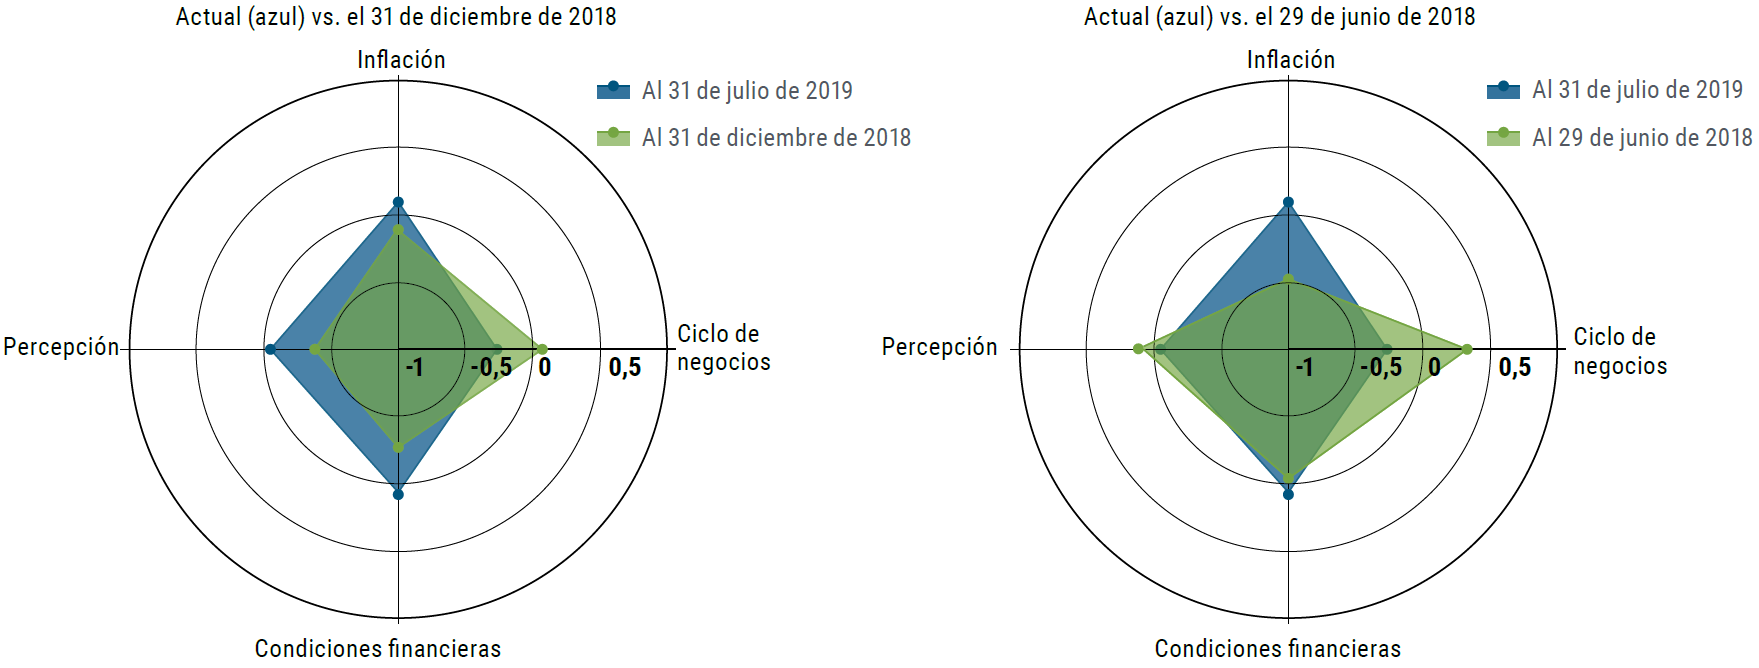 Figure 2 uses two spider web graphics that visually chart changes over time of the four macroeconomic categories of inflation, business cycle, financial conditions and sentiment. Marked by concentric circles, the center of web represents a score of negative one, with the first circle negative 0.5, the second circle, zero, the third, 0.5, and the fourth, one. The webs compare the metrics at current situationâ€”July 2019â€” versus the end of 2018 and the end of June 2018. The charts show that since the end of 2018, macro conditions in July 2019 had improved despite deteriorating business cycle conditions. These have been offset by better inflation outlook, as well as indicators of stronger sentiment and looser financial conditions.